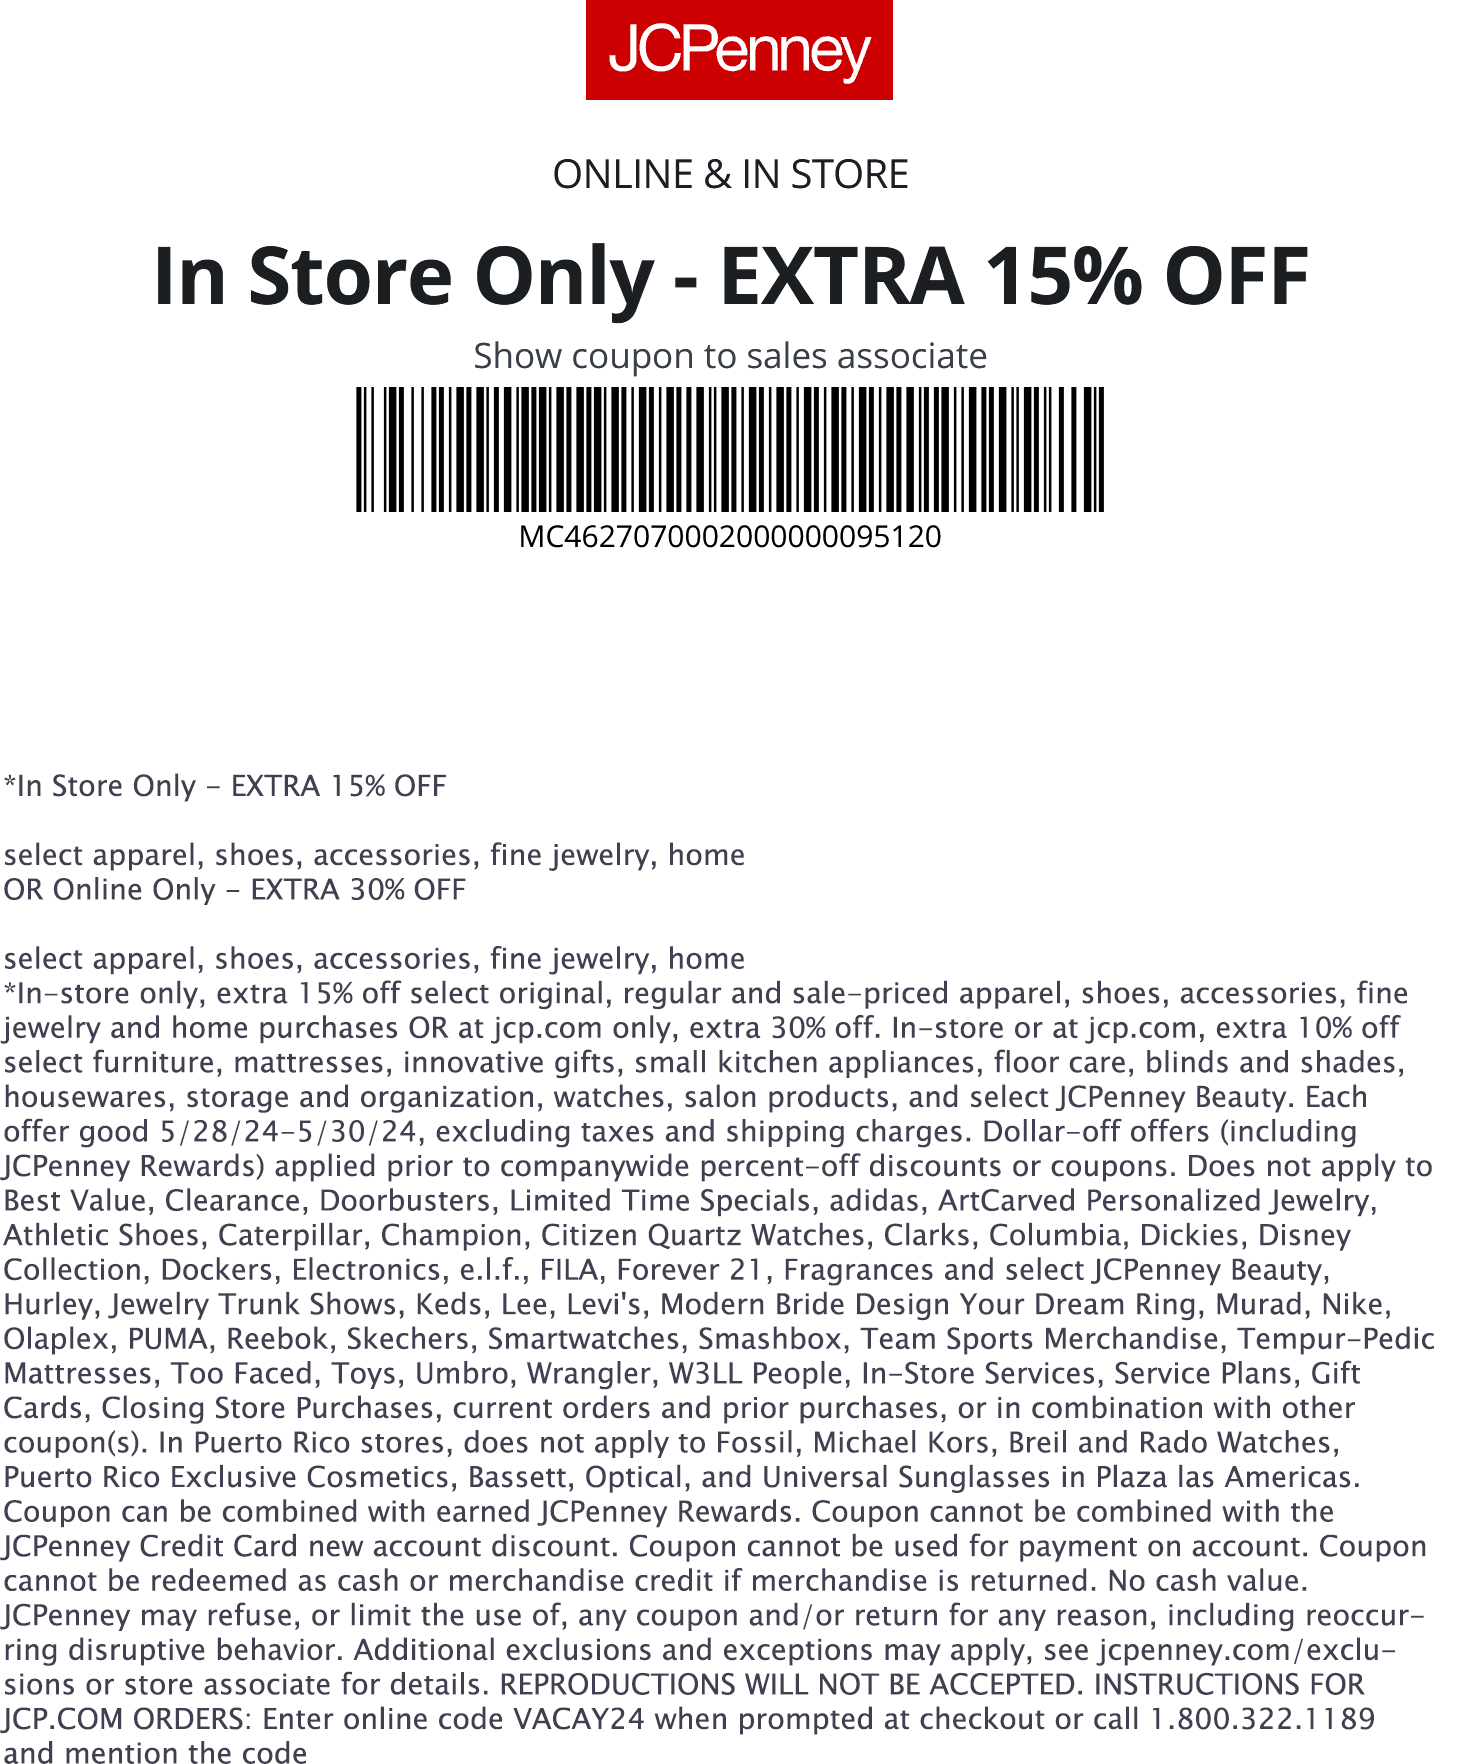 JCPenney stores Coupon  15% off today at JCPenney, or online via promo code VACAY24 #jcpenney 